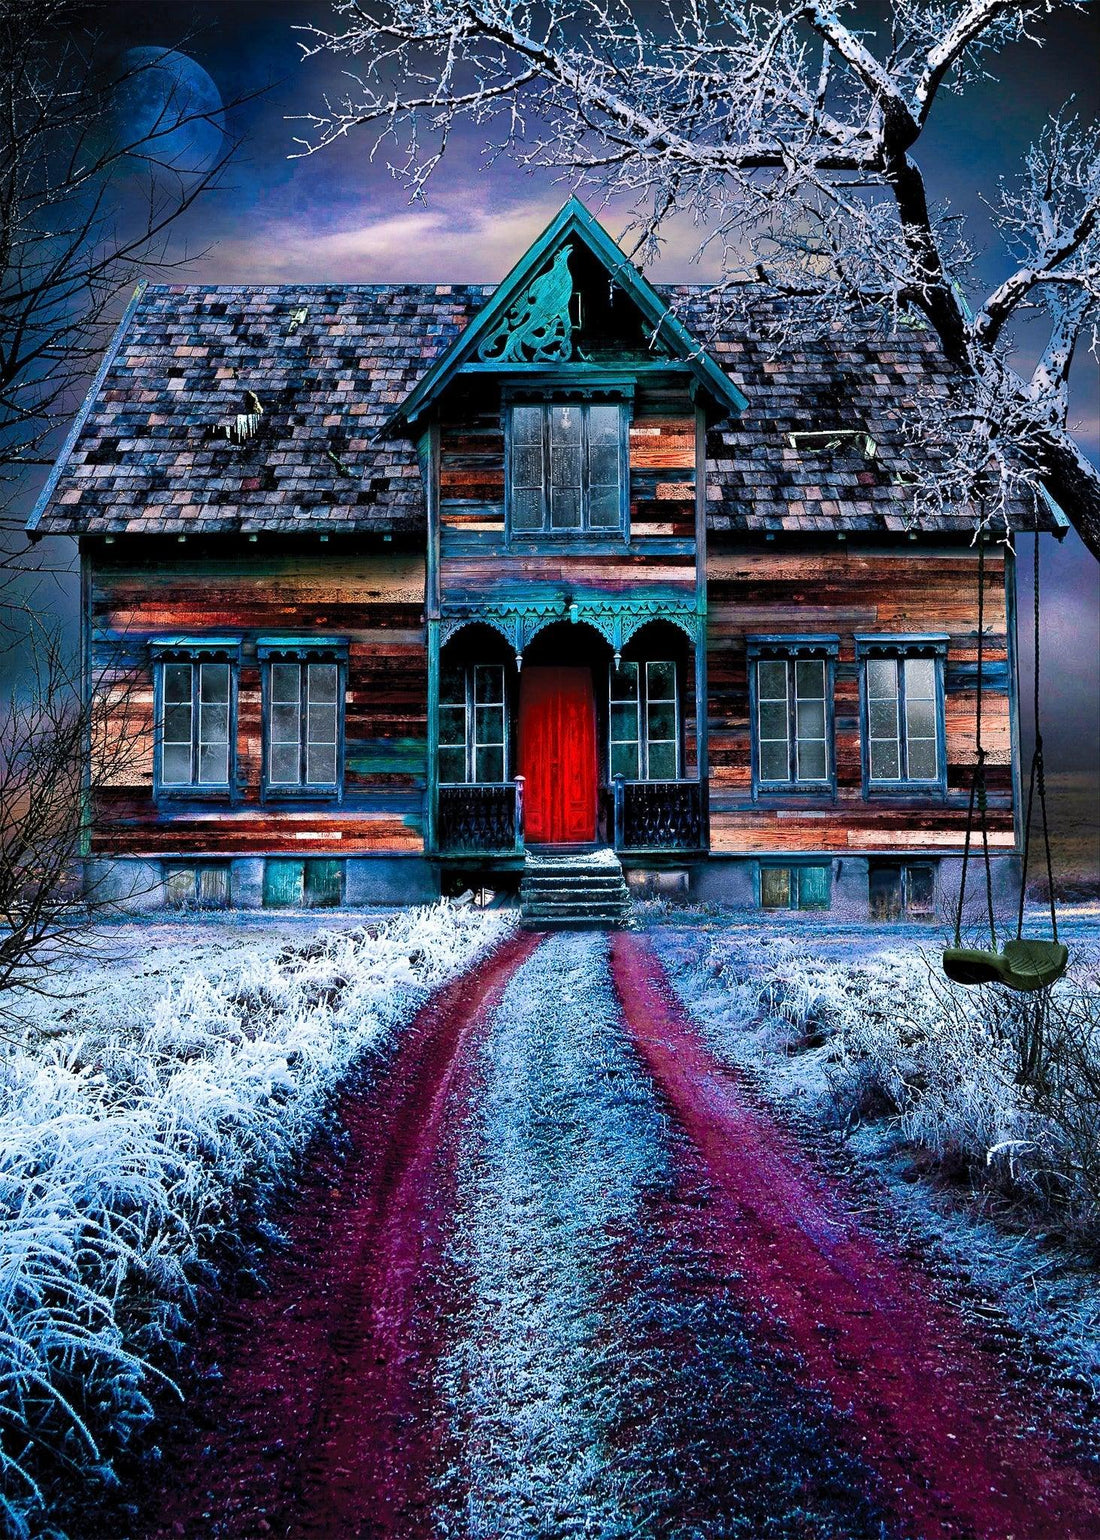 PRE-ORDER FLIPSI COMPLETE: Haunted House Puzzle | Flipsi Board Included - Flipsi Puzzles